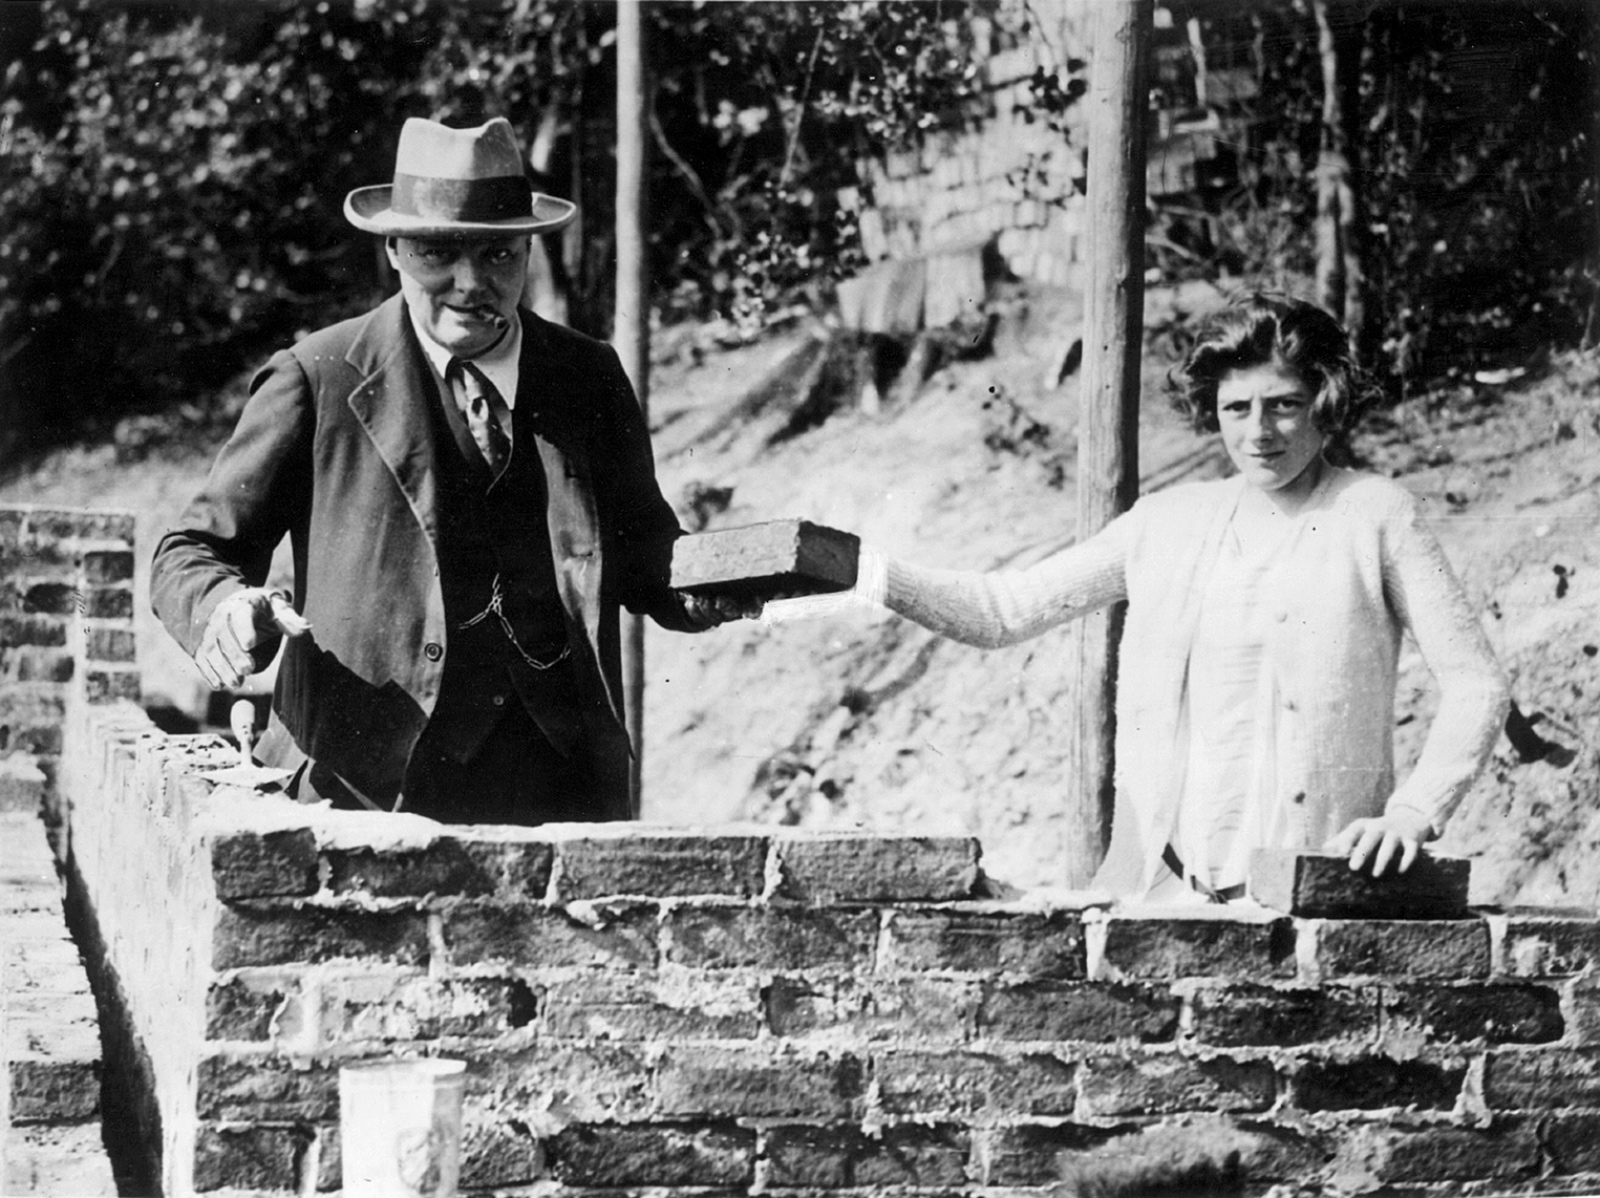 Winston Churchill and his daughter Sarah laying bricks at their house in Chartwell, Kent, September 1928